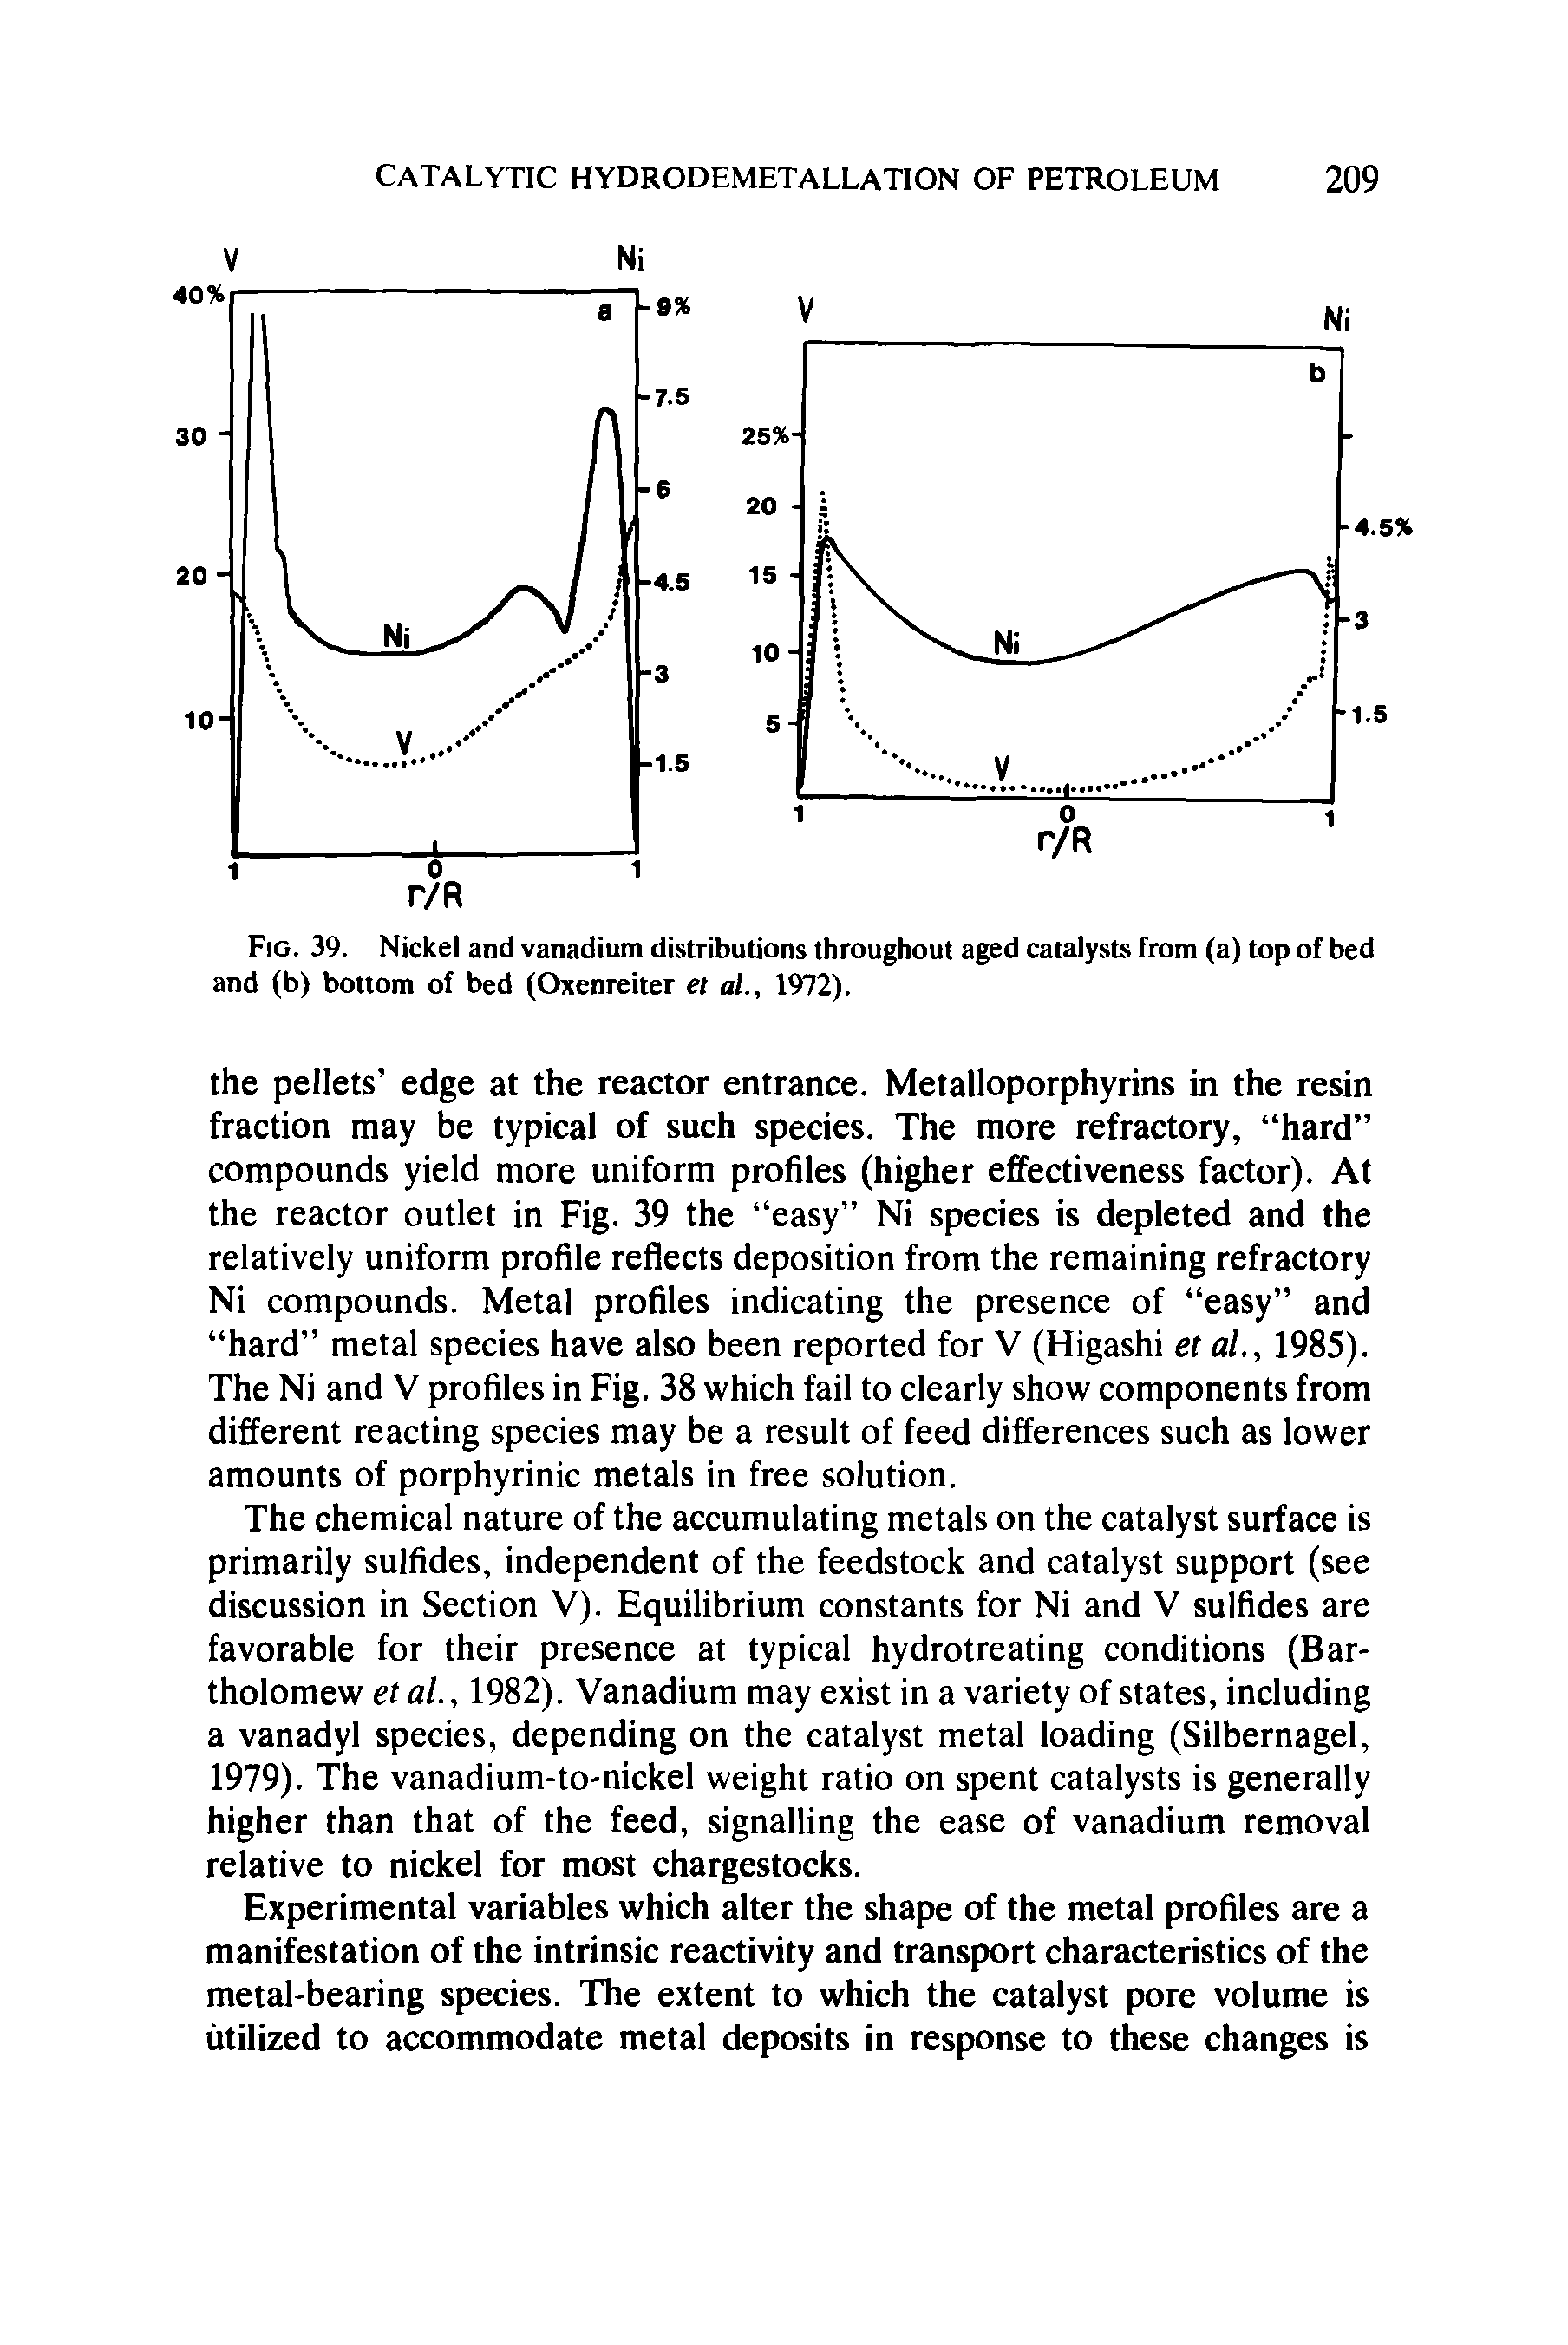 Fig. 39. Nickel and vanadium distributions throughout aged catalysts from (a) top of bed and (b) bottom of bed (Oxenreiter et al., 1972).